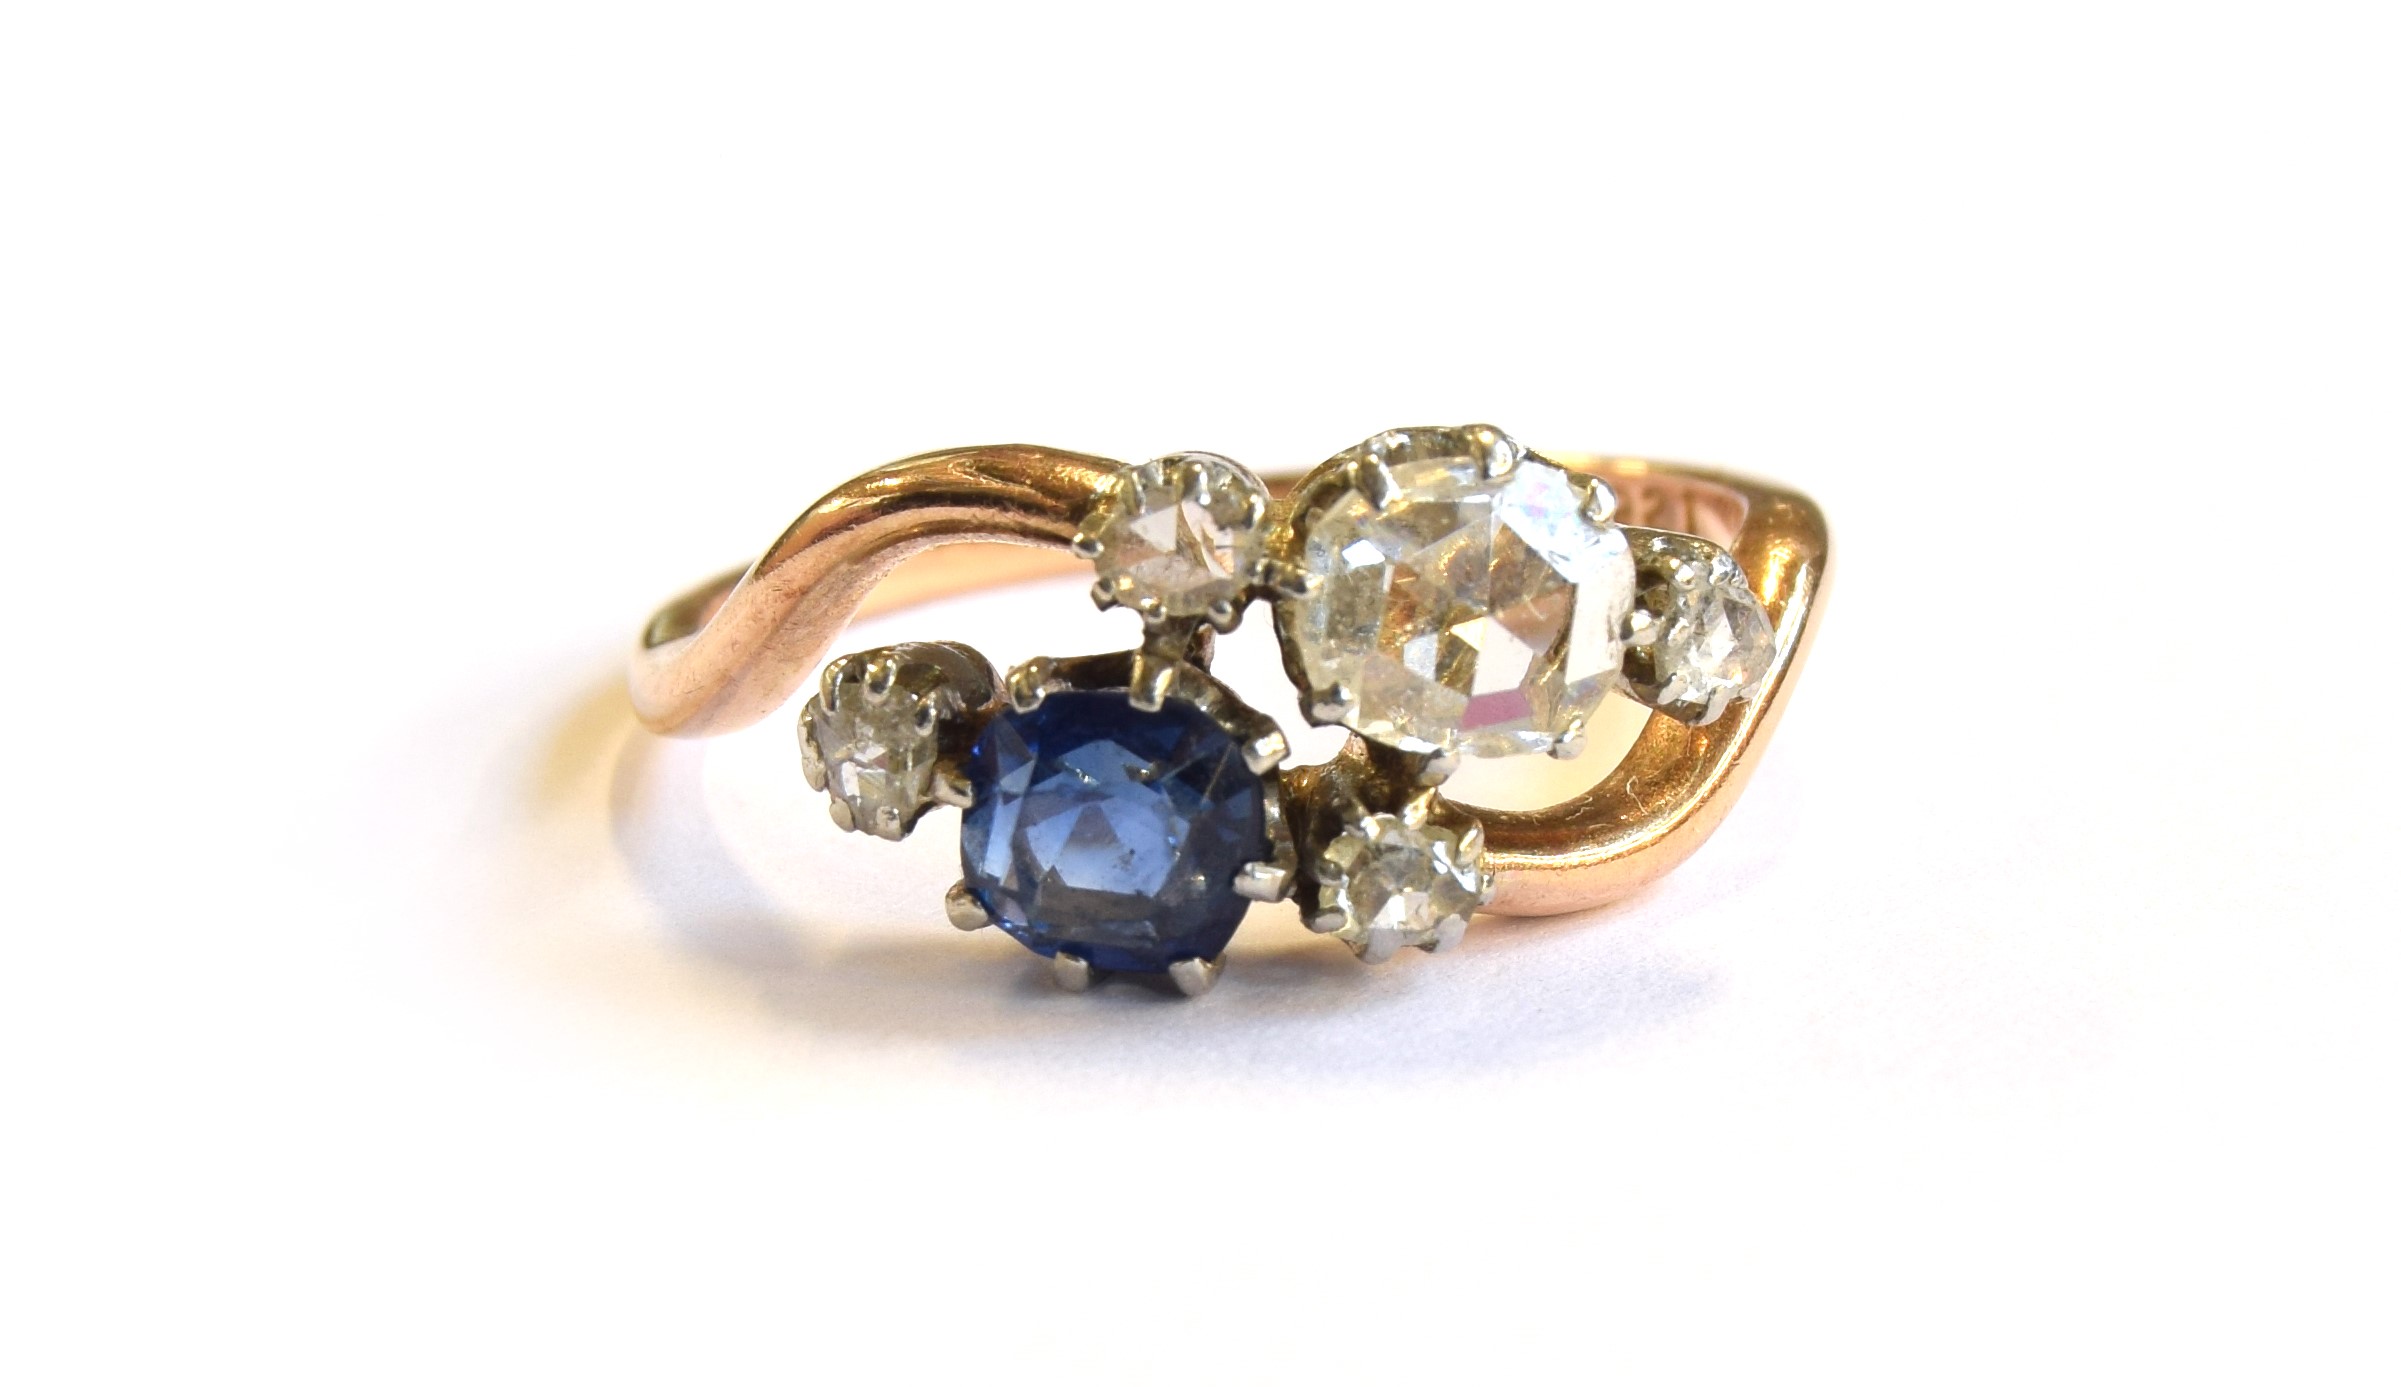 An early 20th century 18ct gold 'Toi et Moi' diamond and sapphire crossover ring, the large rose cut - Image 5 of 6